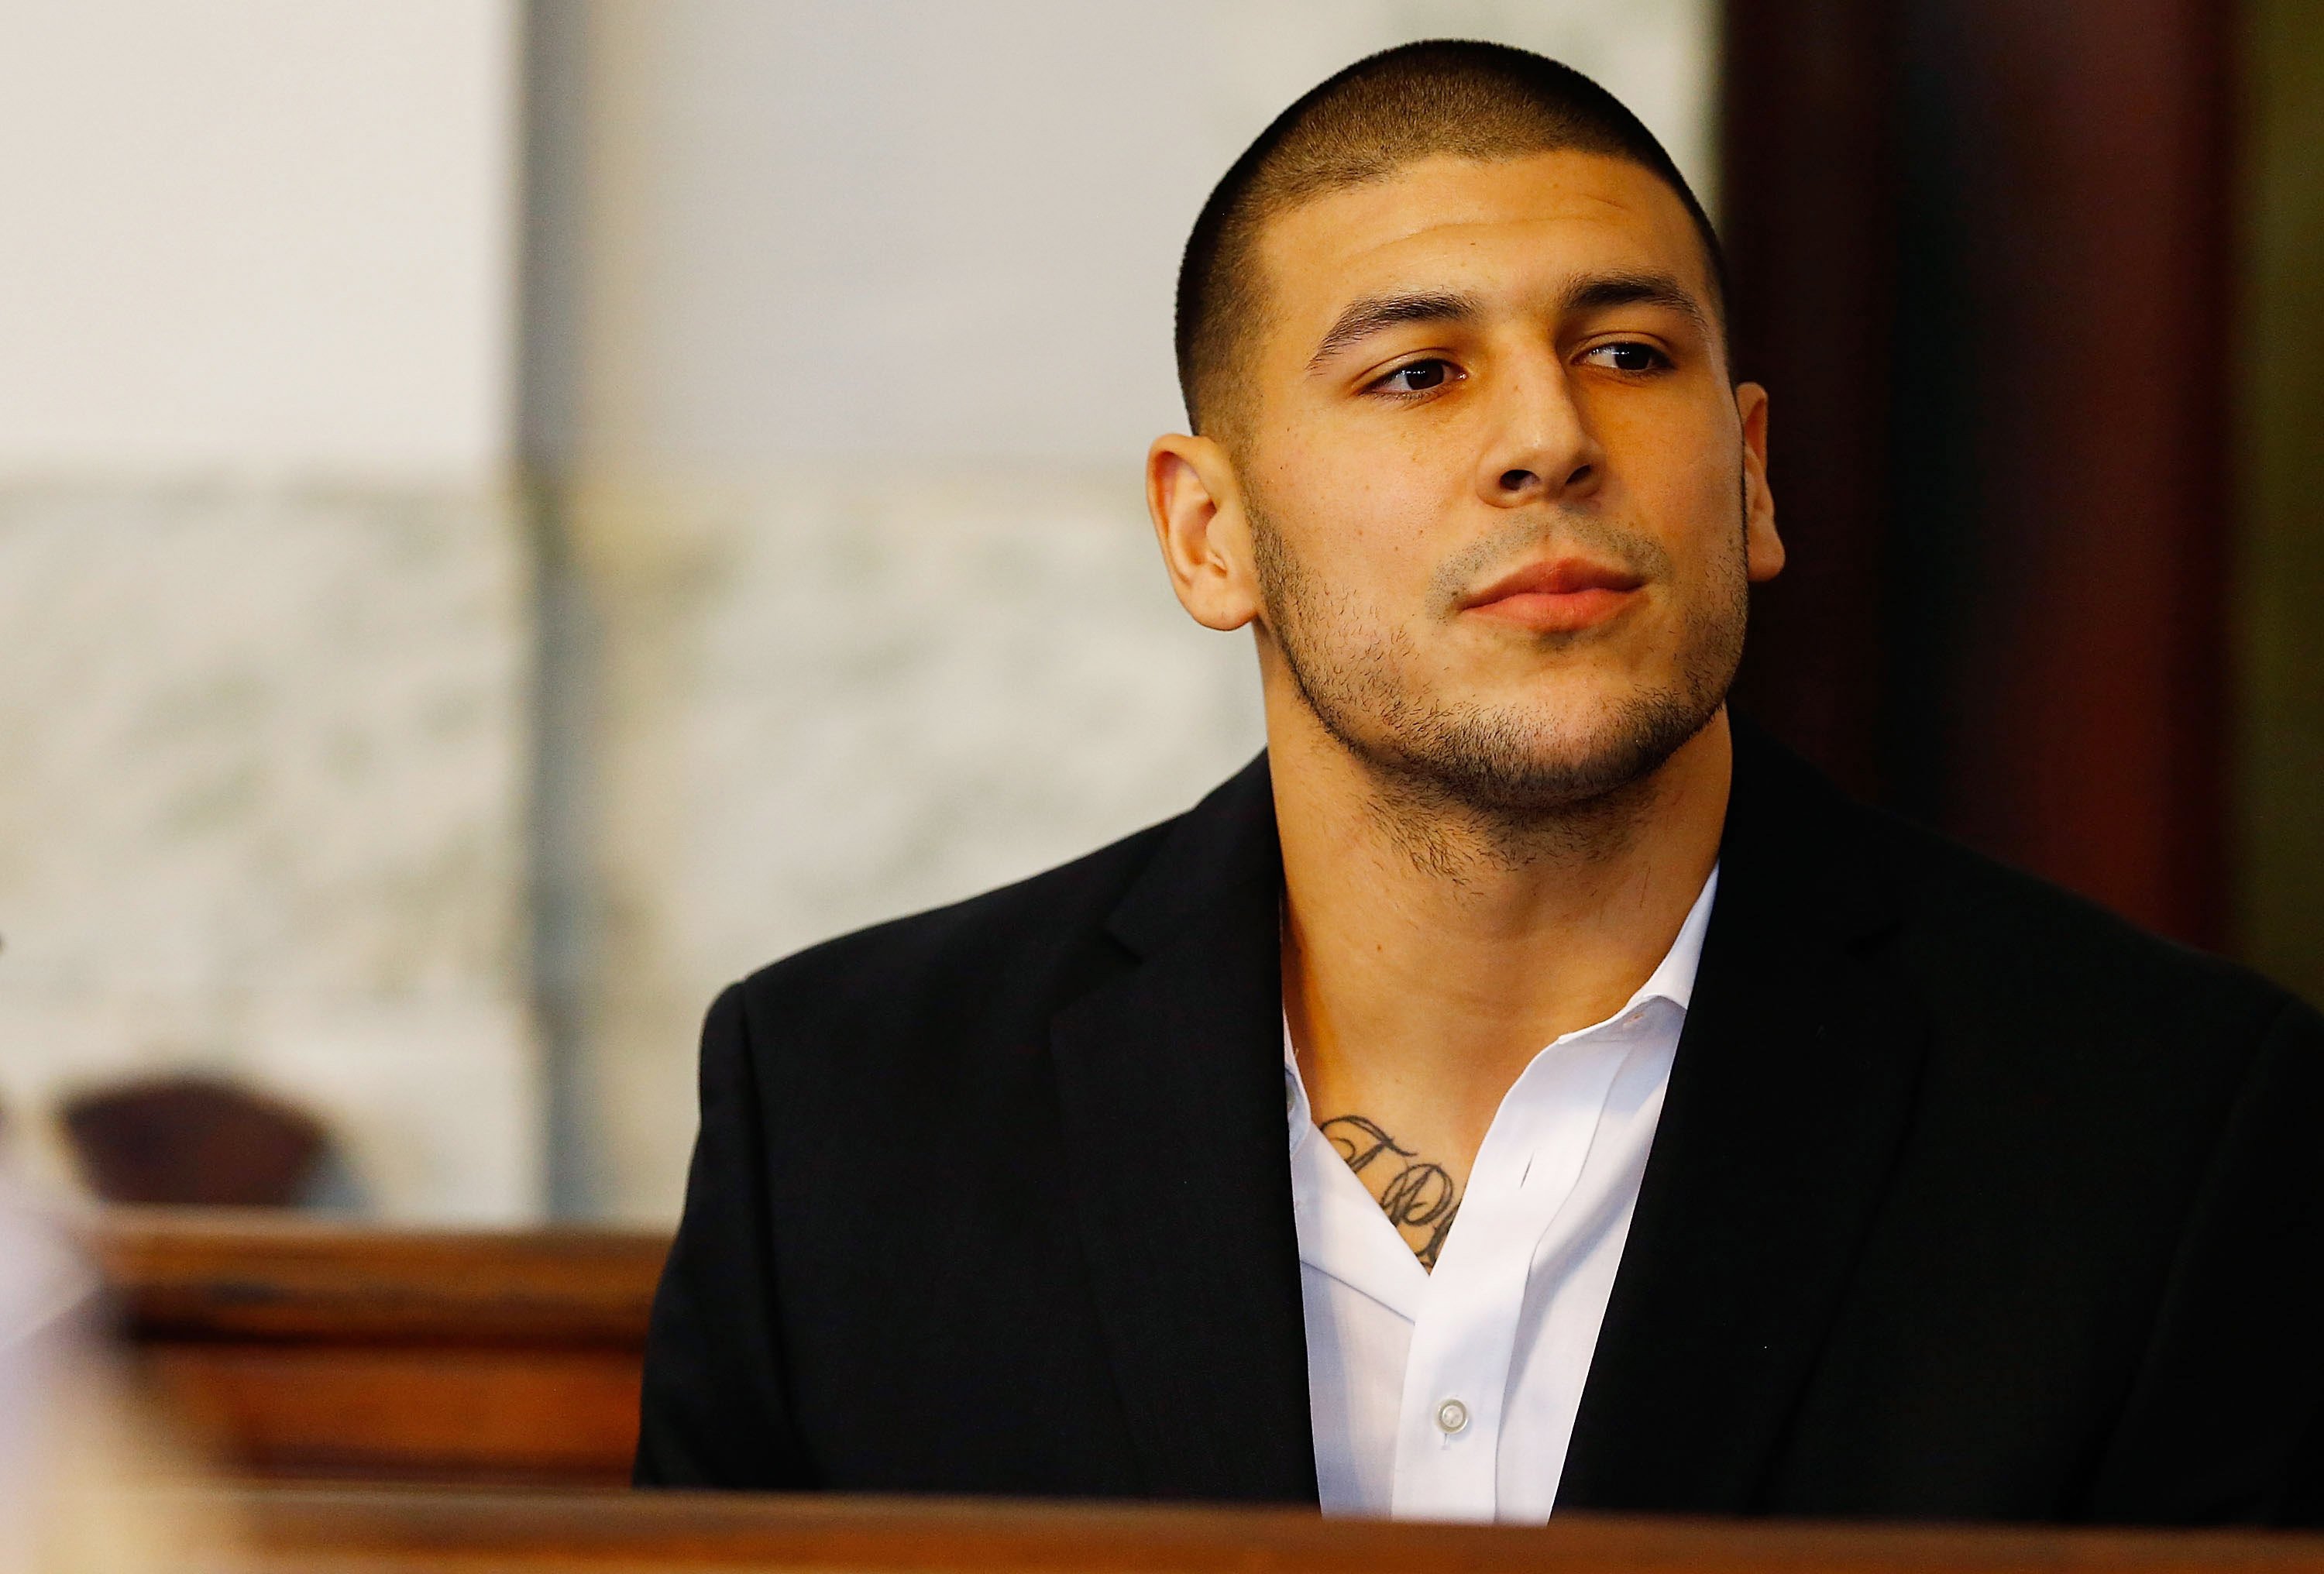 Aaron Hernandez sits in the courtroom of the Attleboro District Court during his hearing on Aug. 22, 2013 in North Attleboro, Mass. (Jared Wickerham—Getty Images)